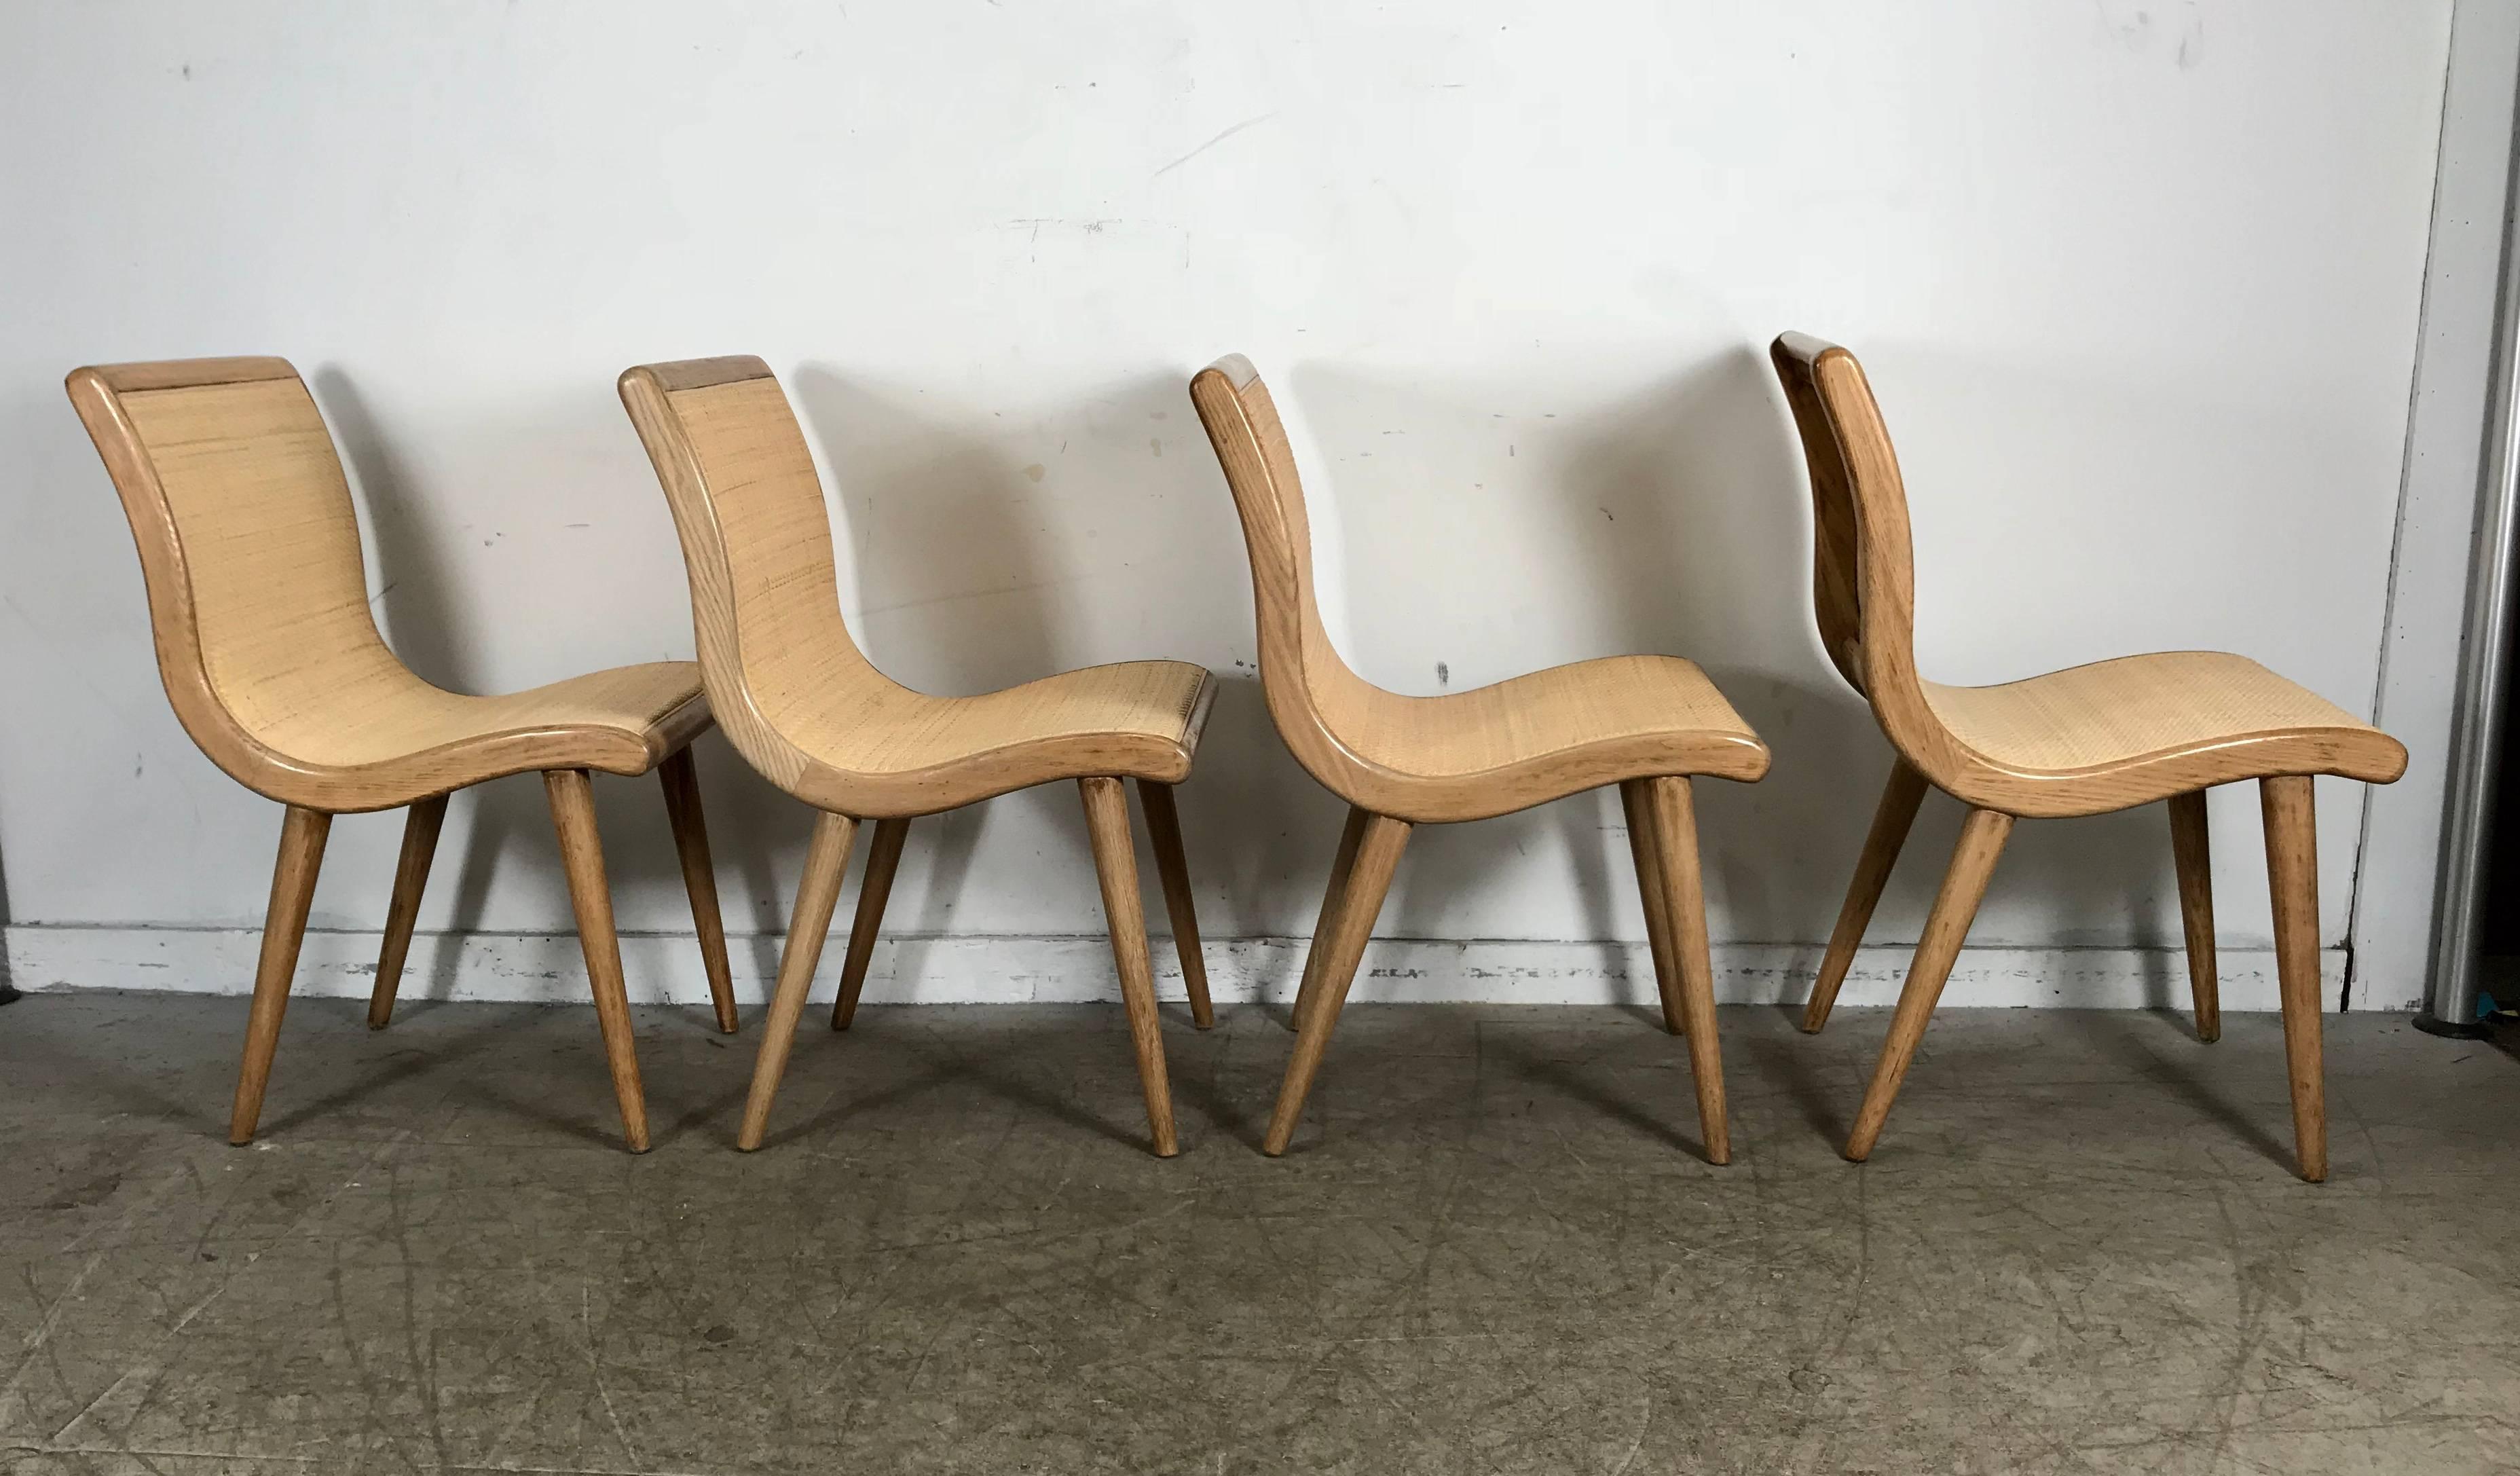 Set of Six Midcentury Dining Chairs, Cerused Oak and Cane by Russel Wright 1